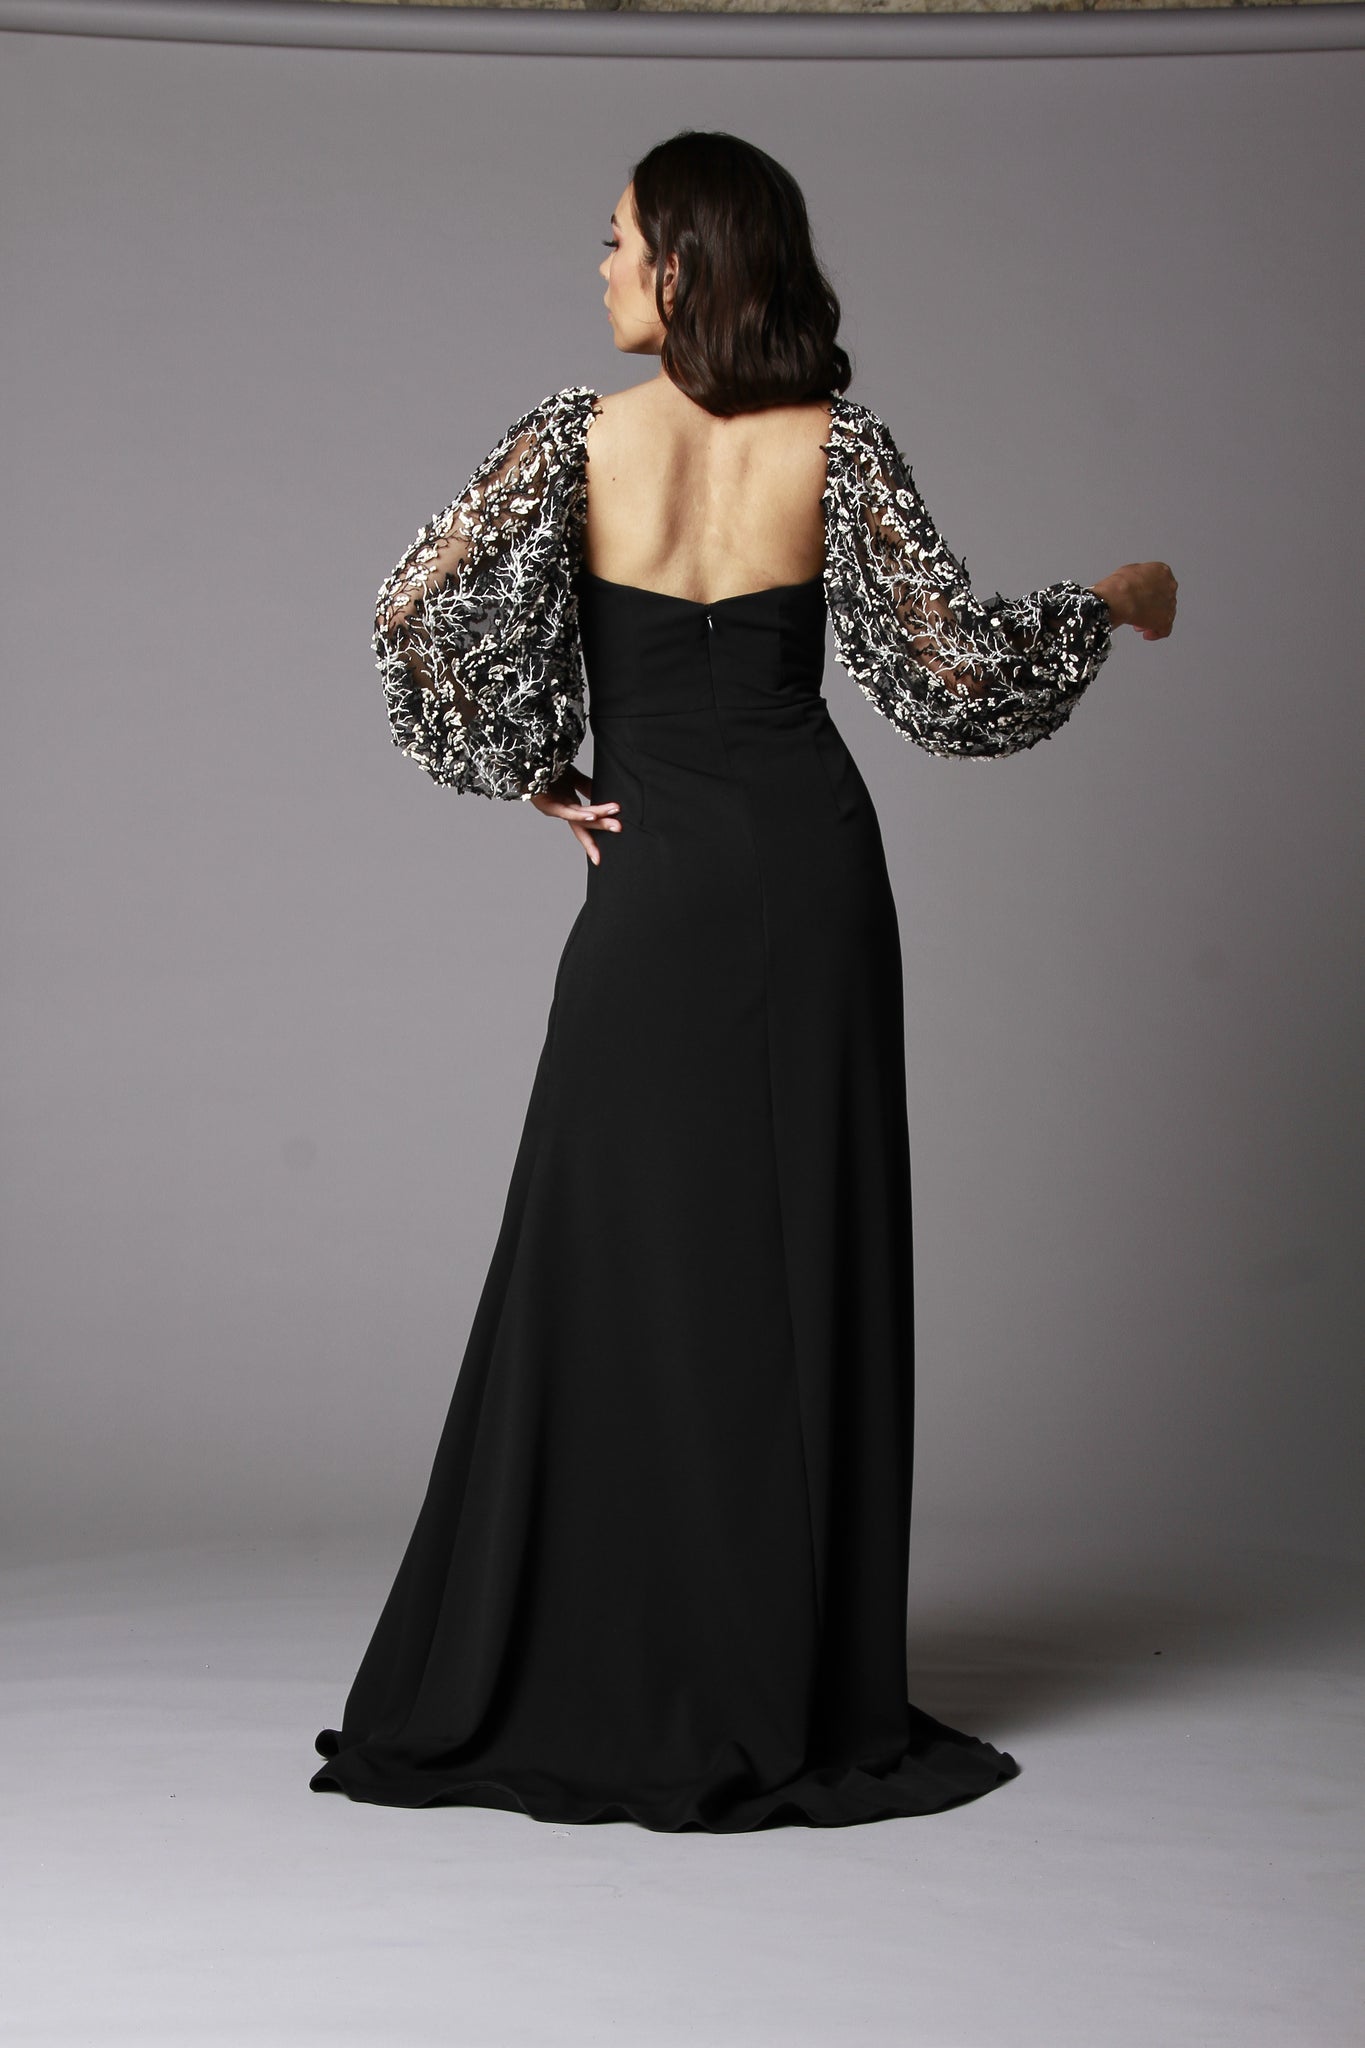 BLACK AND WHITE LONG SLEEVE GOWN